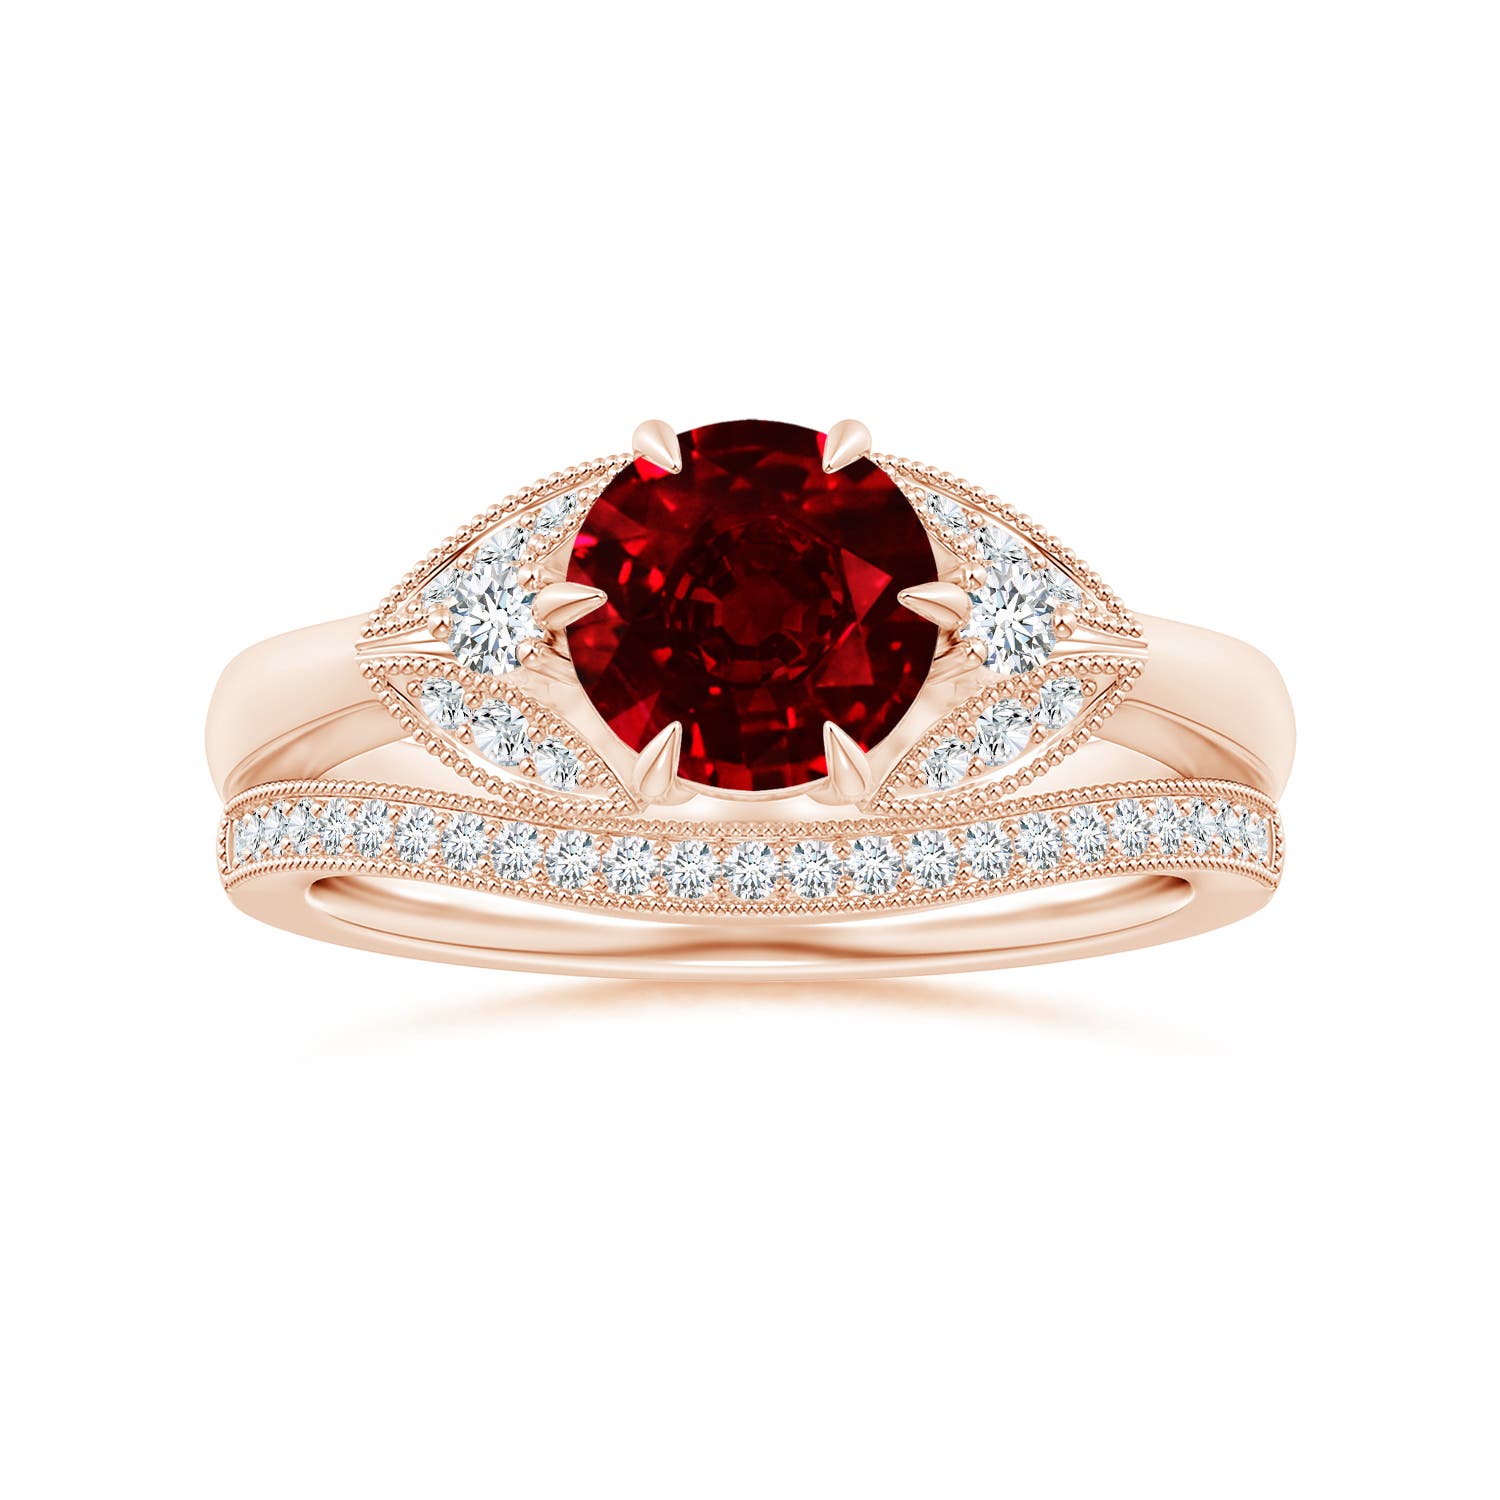 AAAA - Ruby / 1.64 CT / 14 KT Rose Gold